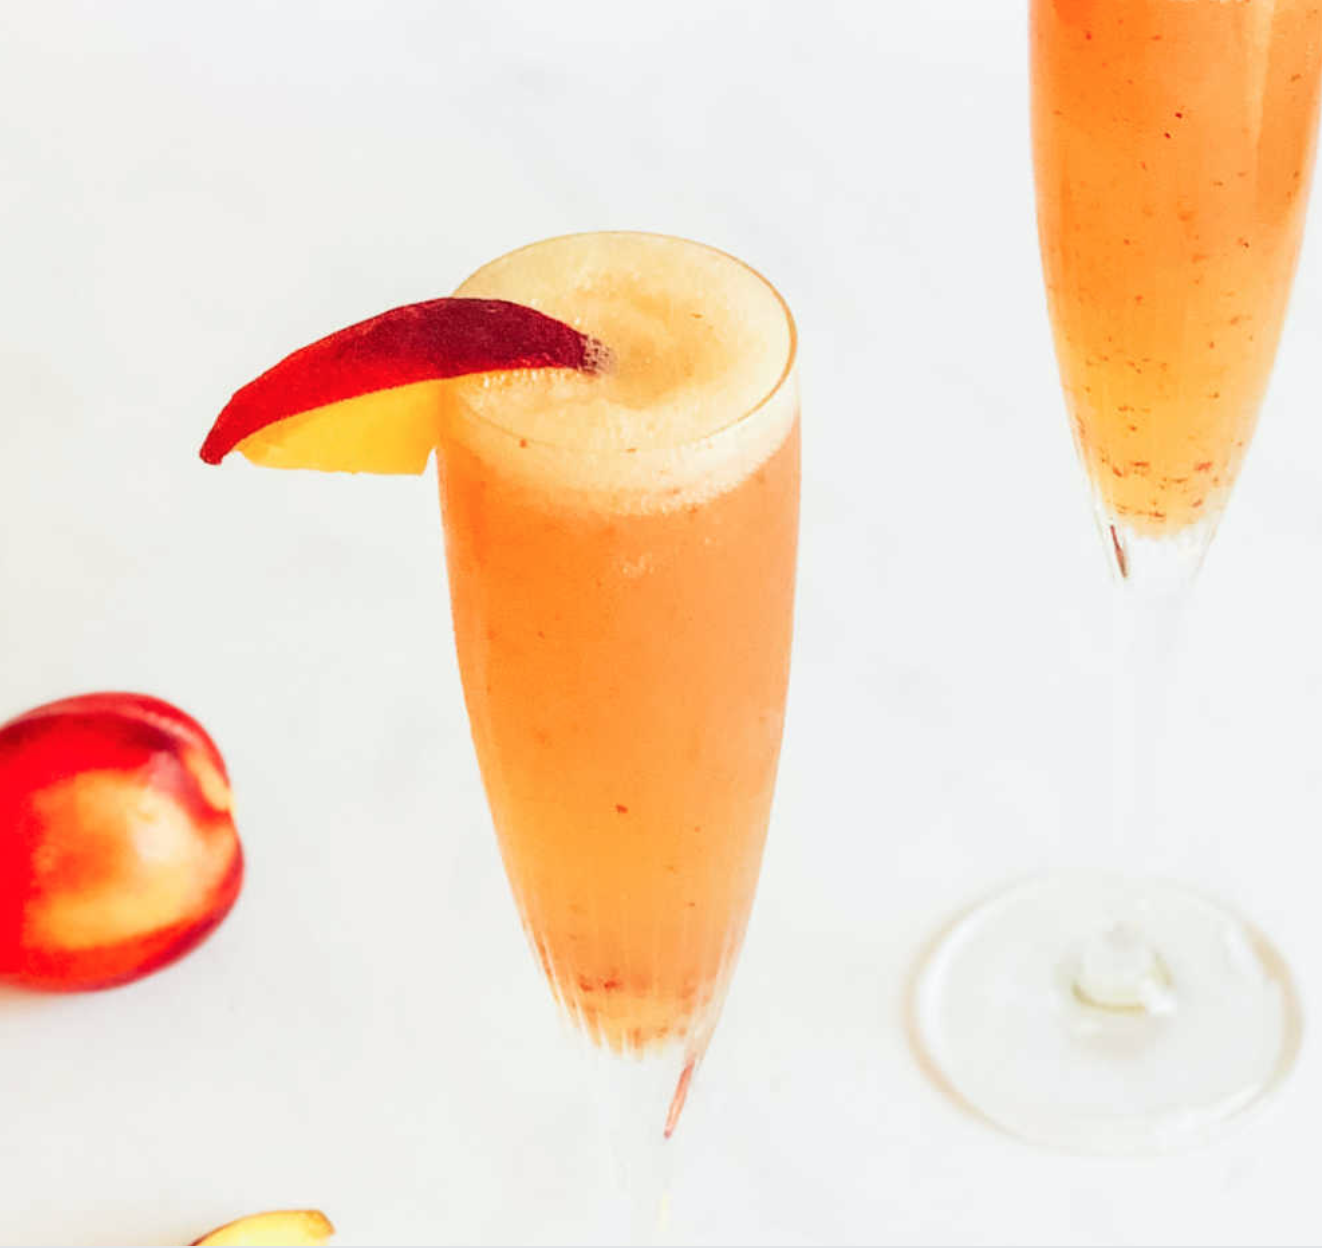 How to make a peach Bellini Cocktail